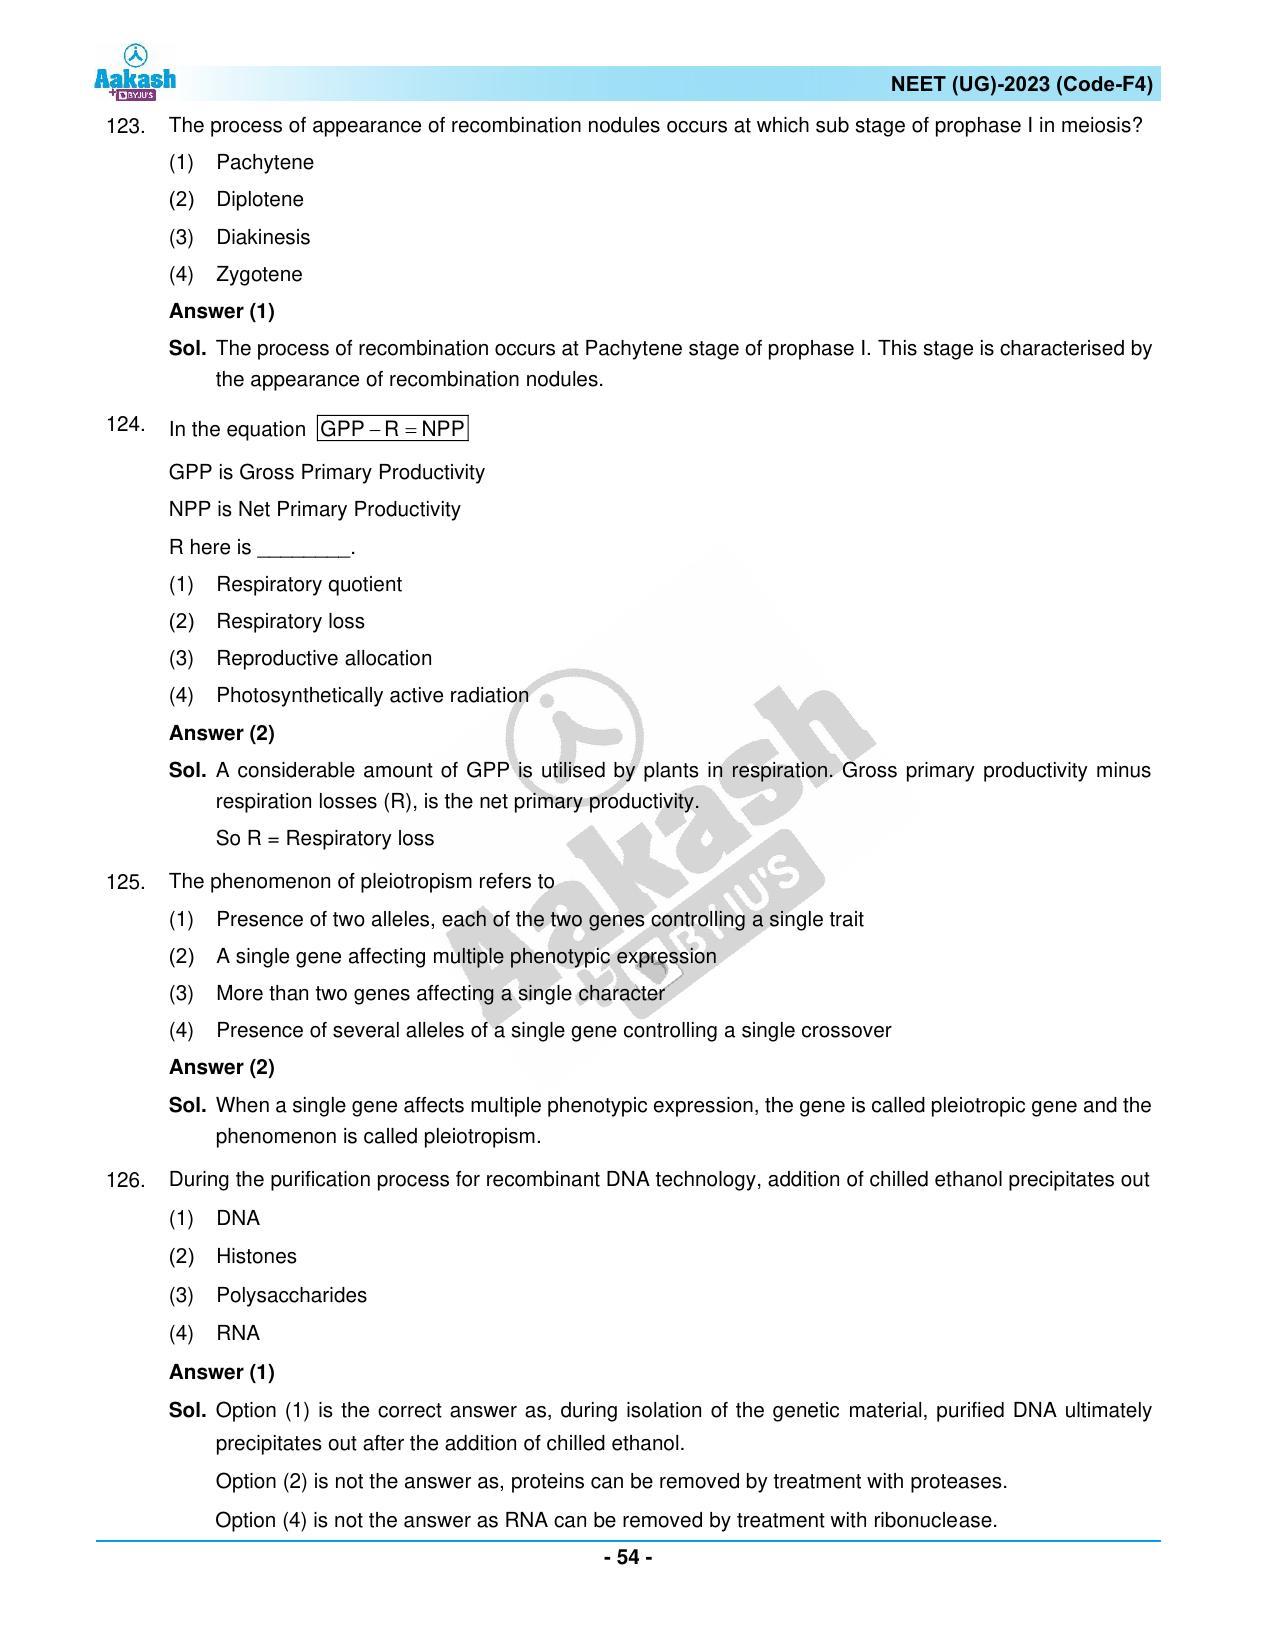 NEET 2023 Question Paper F4 - Page 54